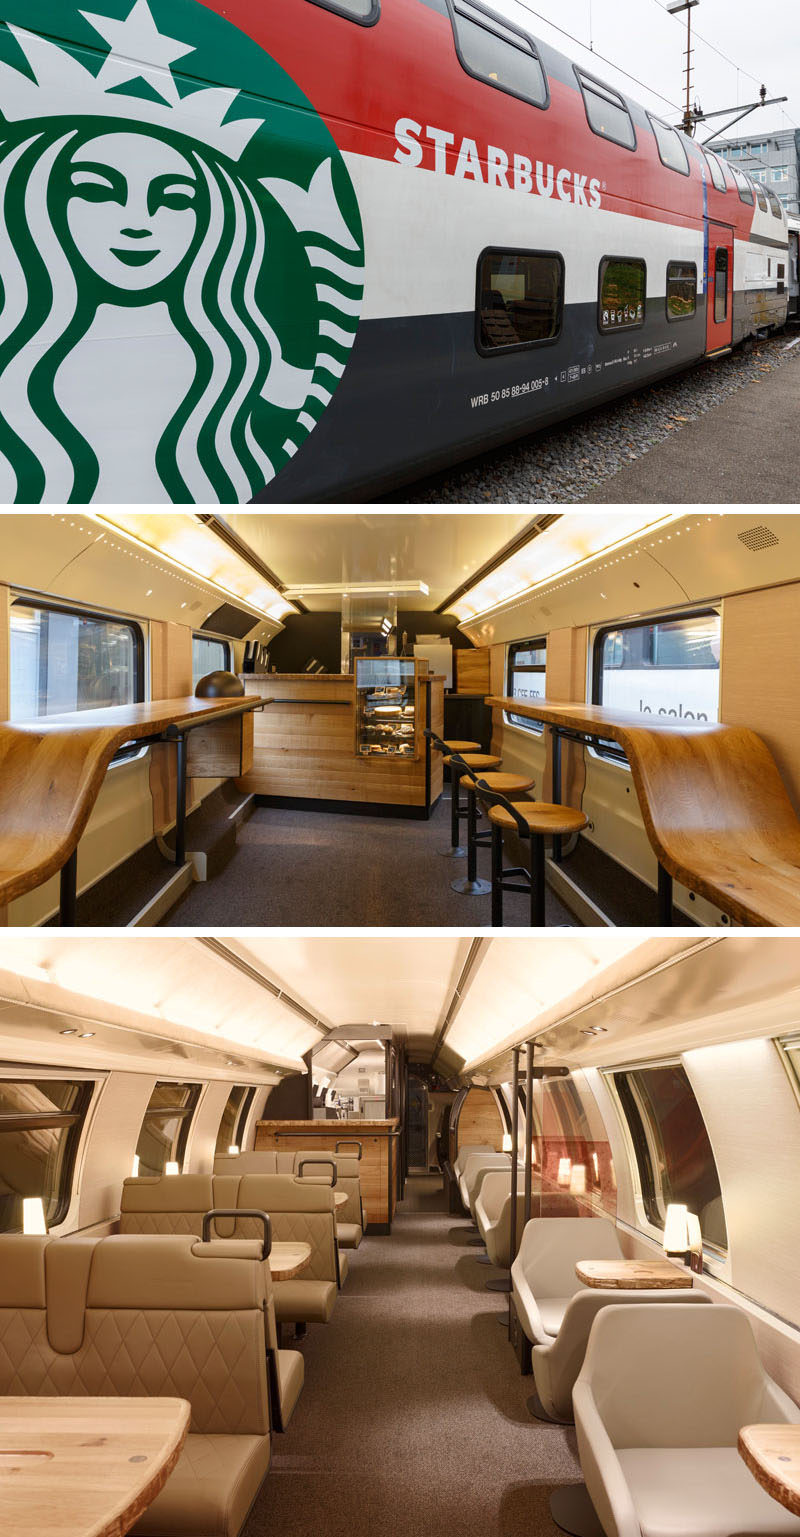 11 Starbucks Coffee Shops From Around The World // The luxury of train travel gets even more luxurious with the addition of a double-decker Starbucks car, that features a walk up bar complete with a small food display as well as an upstairs in which train riders can order their food and coffee from the comfort of their padded leather seats.